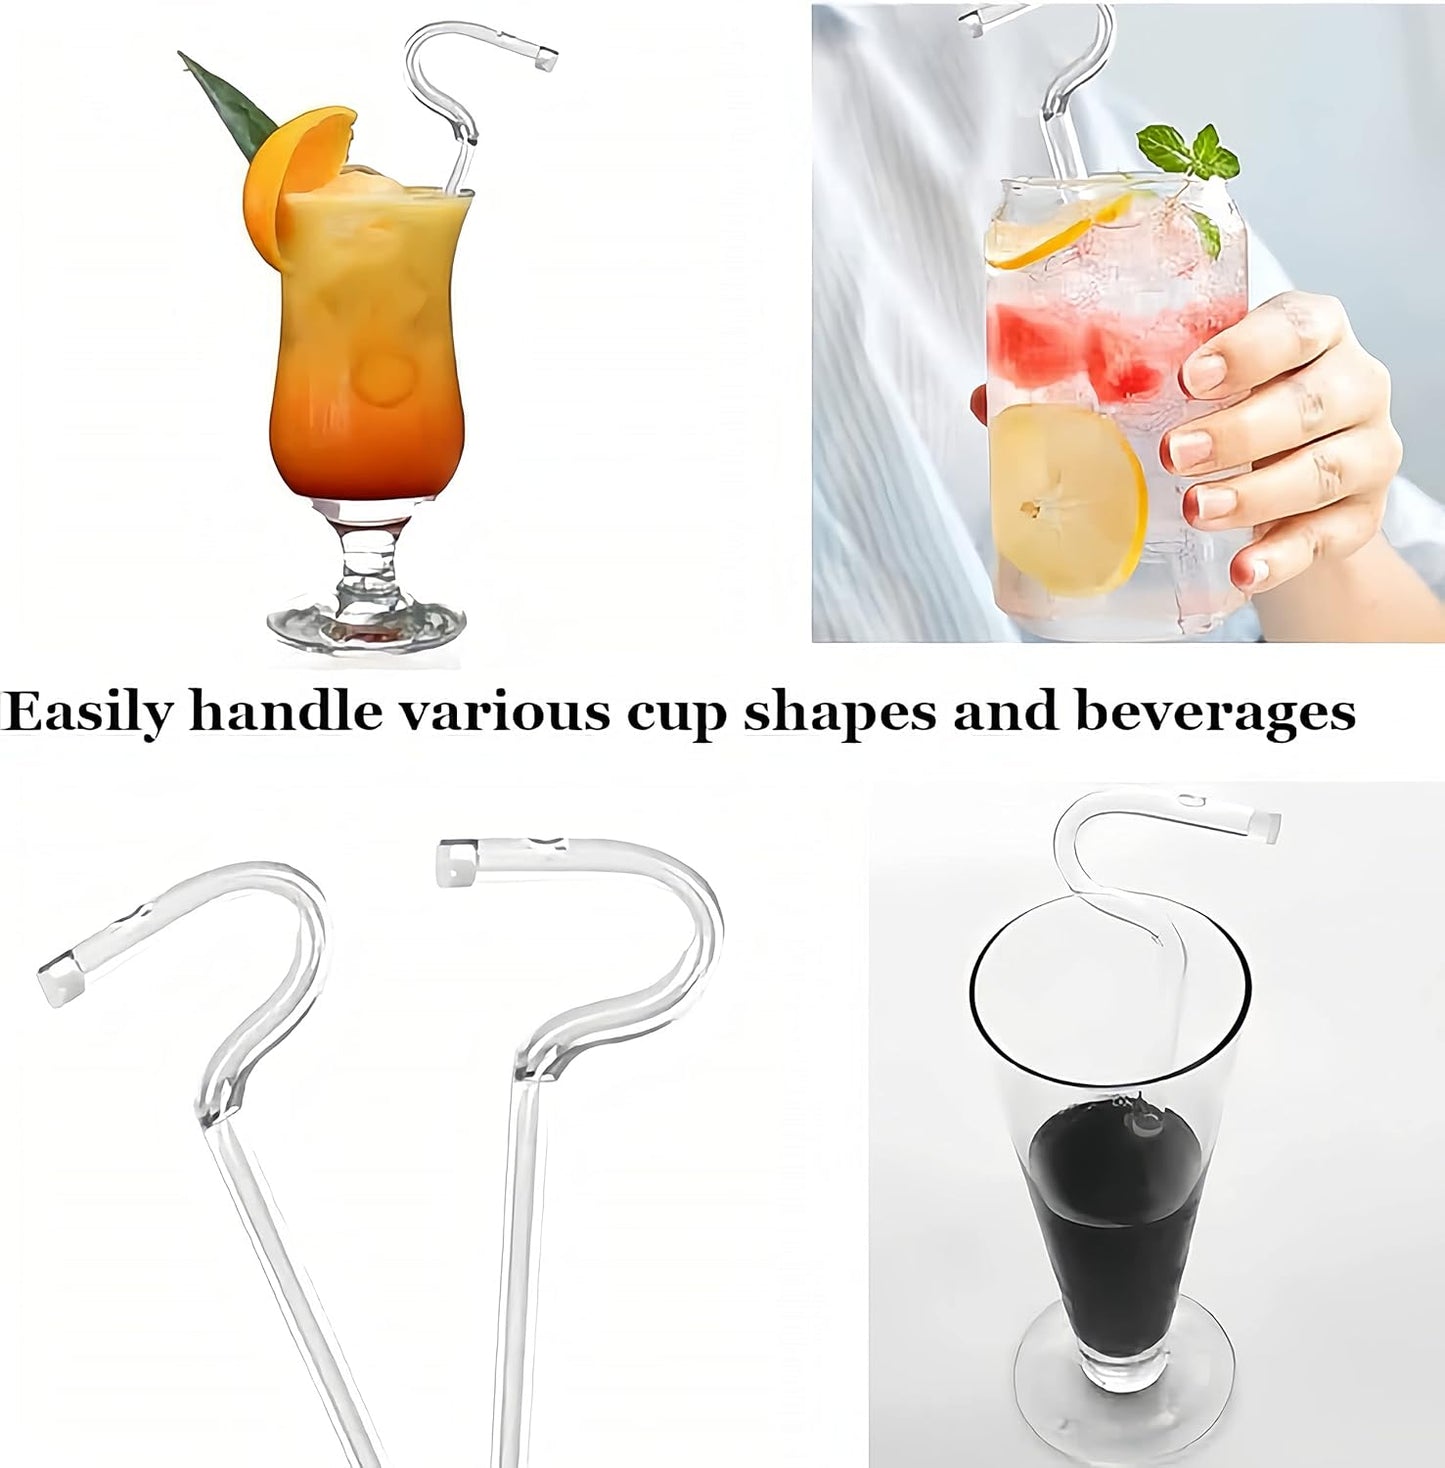 Valentine's Day Gifts, Anti Wrinkle Straw, Glass anti-wrinkle drinking straws, Clear Reusable Straws with Cleaning Brush, Eco-Friendly Alternative to Plastic, Cleaning Brush Included, 2 Pack